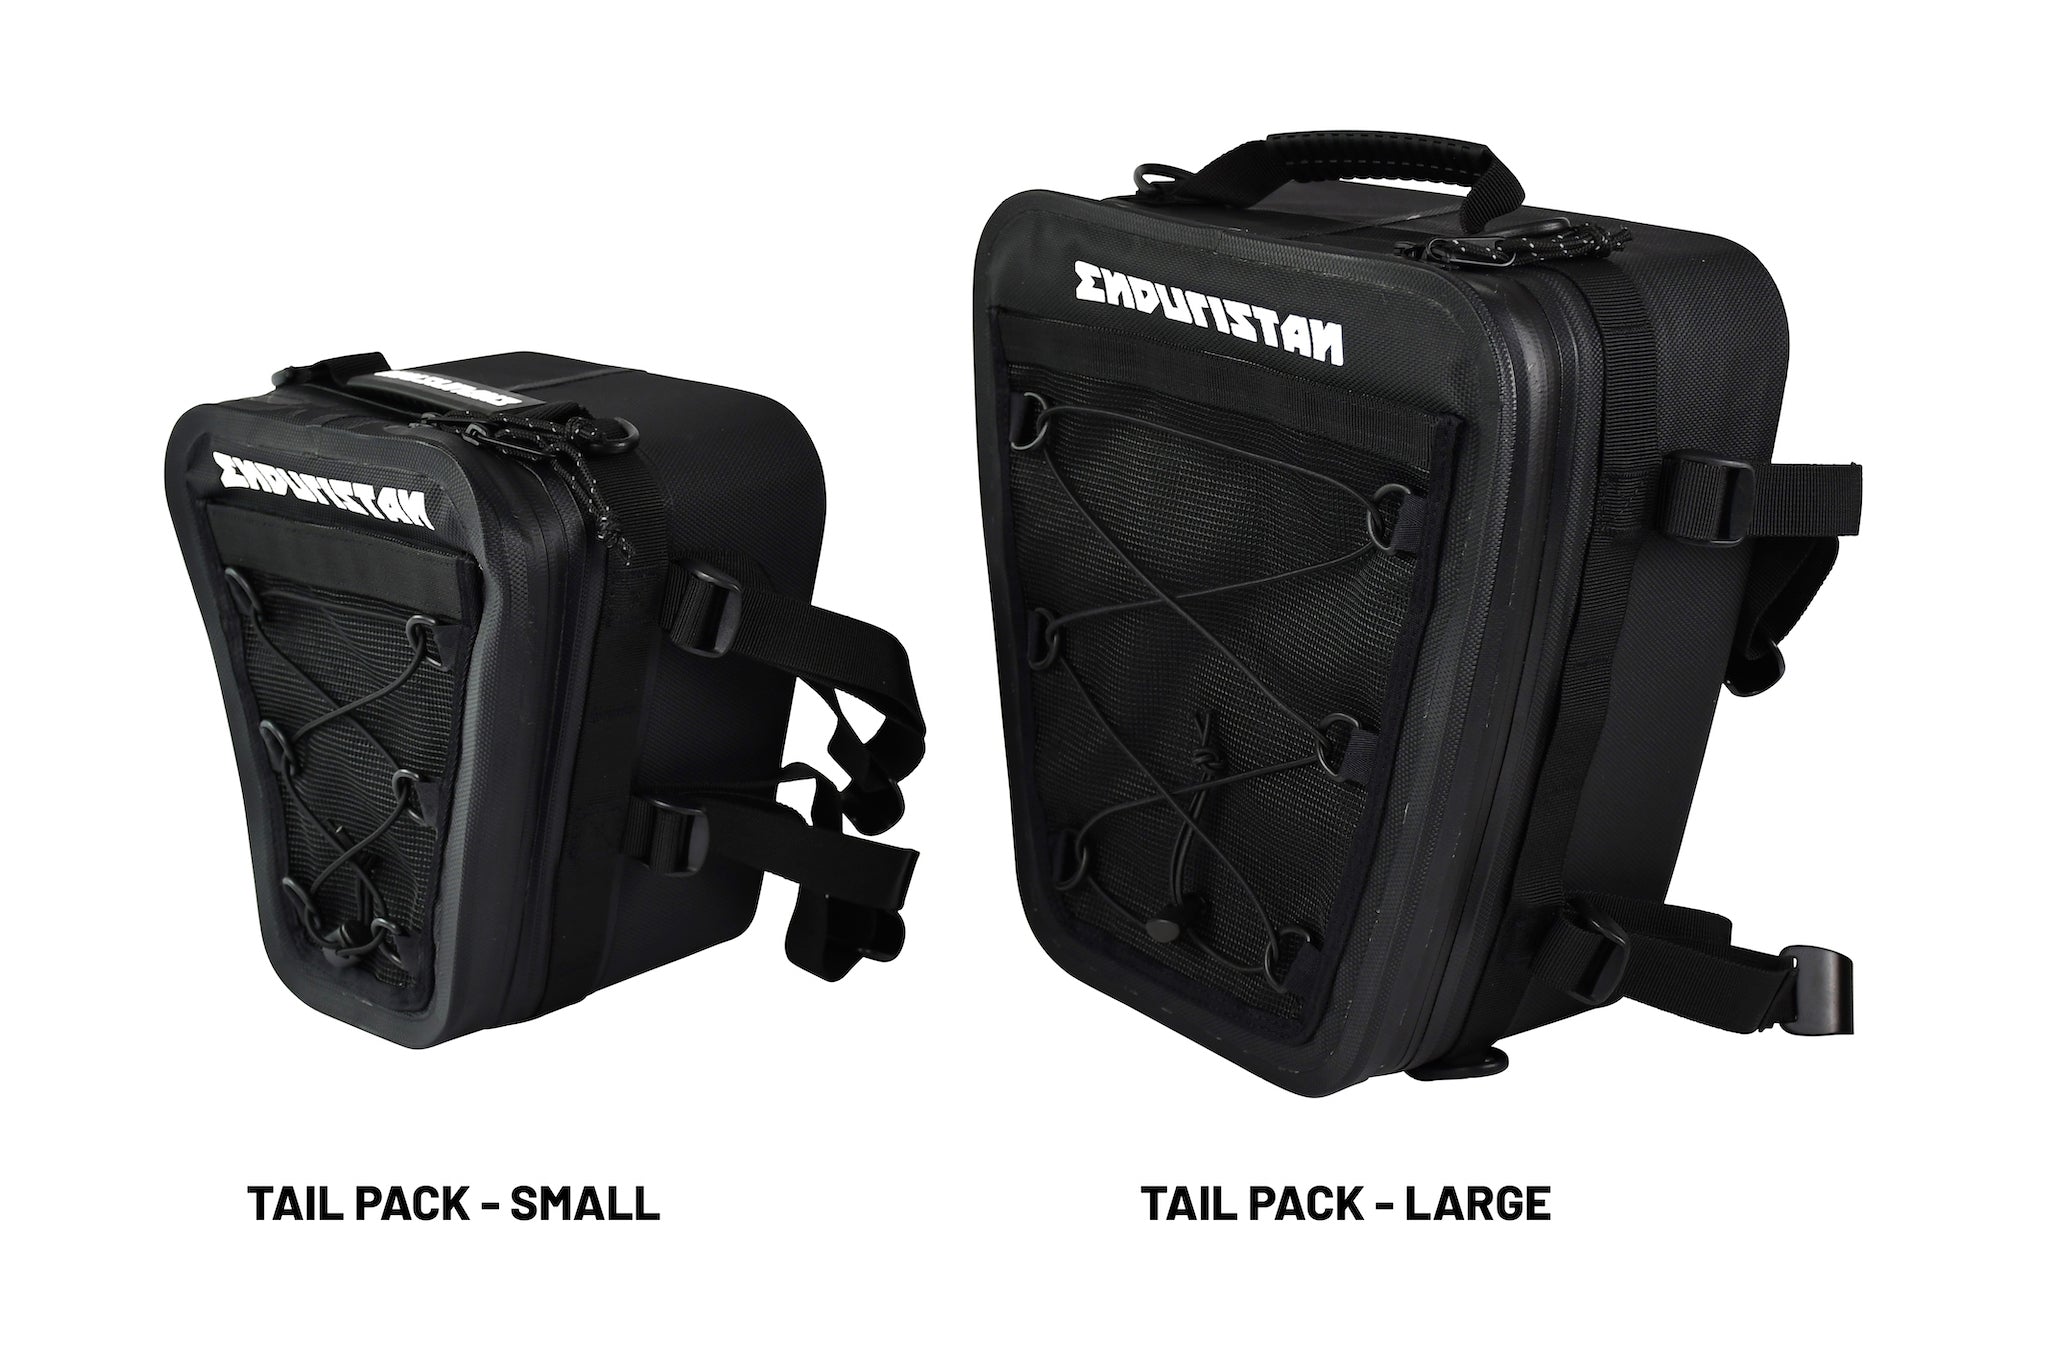 Tail Pack - Small